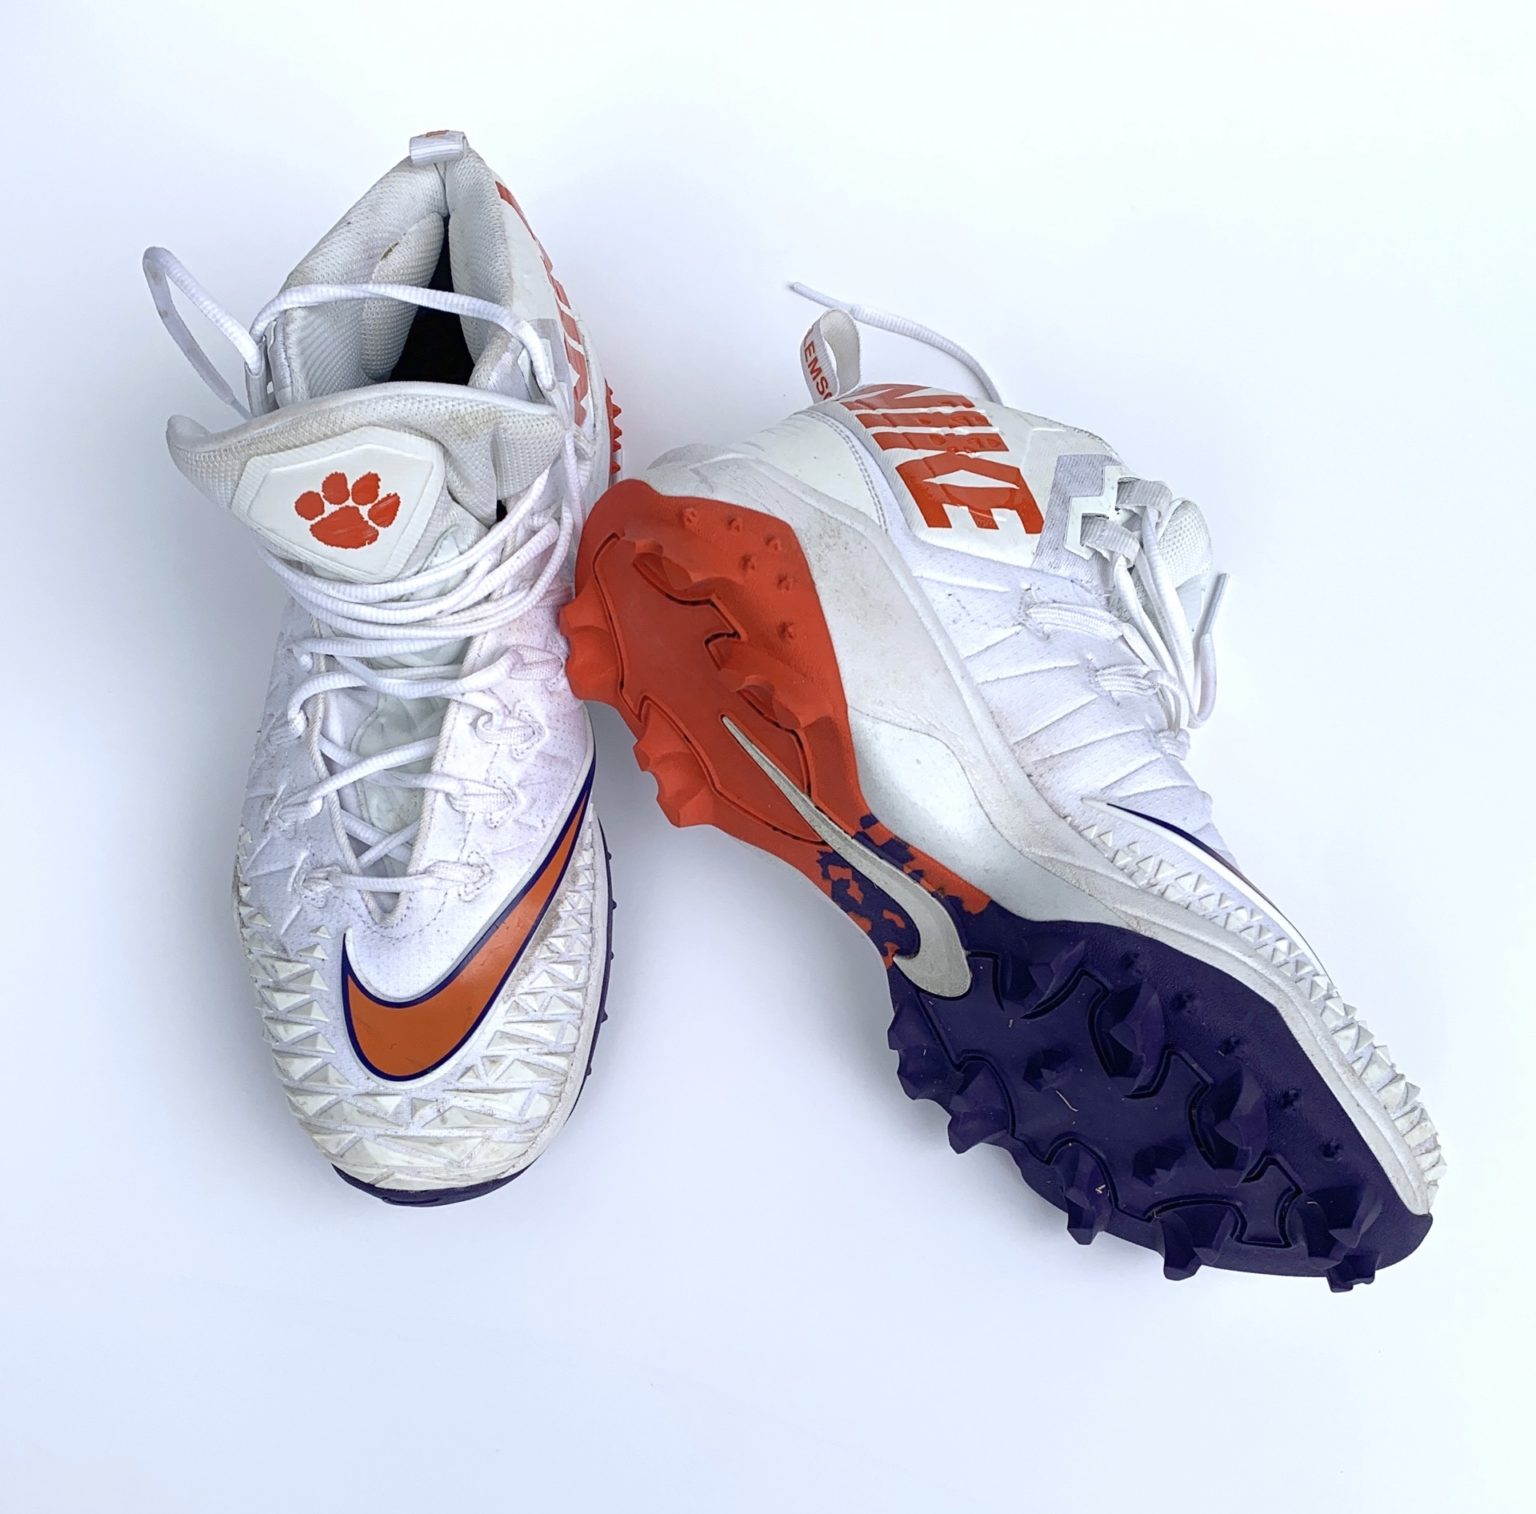 Clemson Football Cleats : NARP Clothing